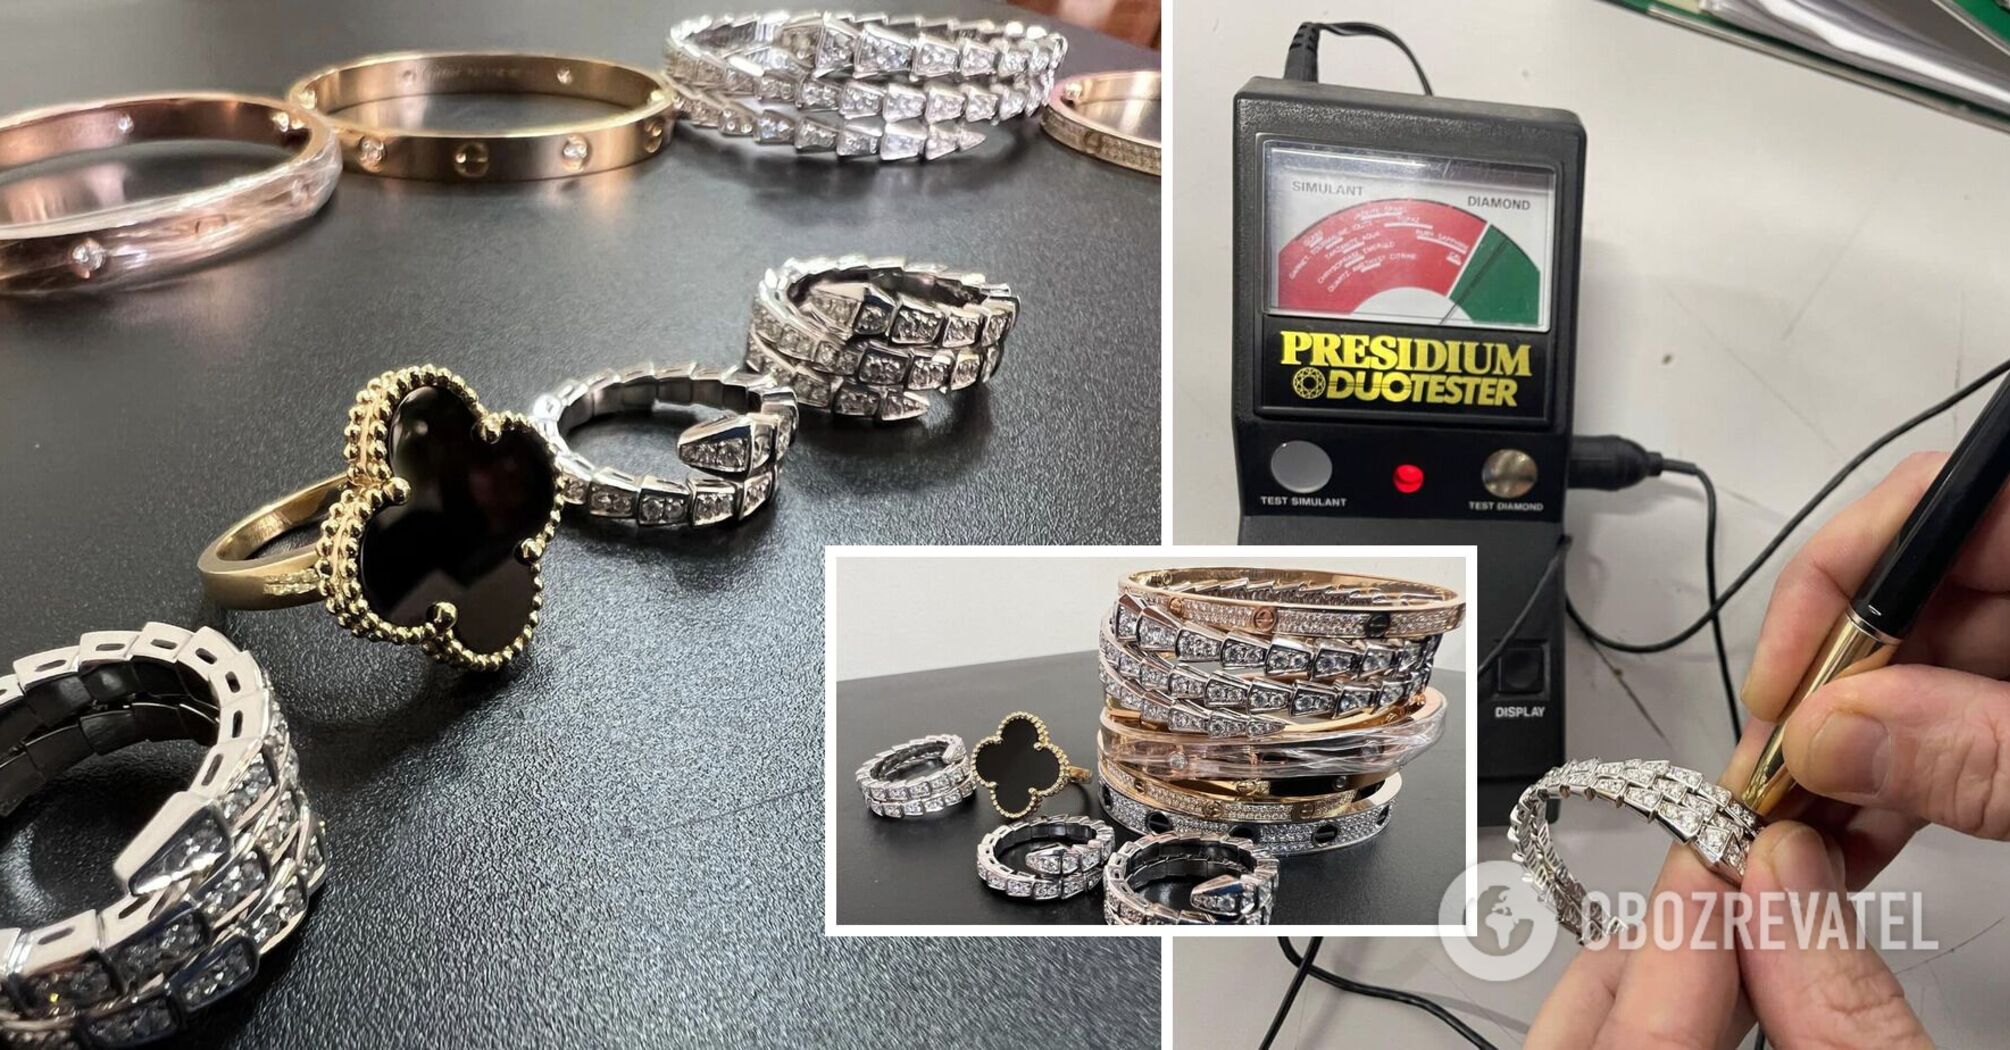 Customs officers found jewelry in a parcel